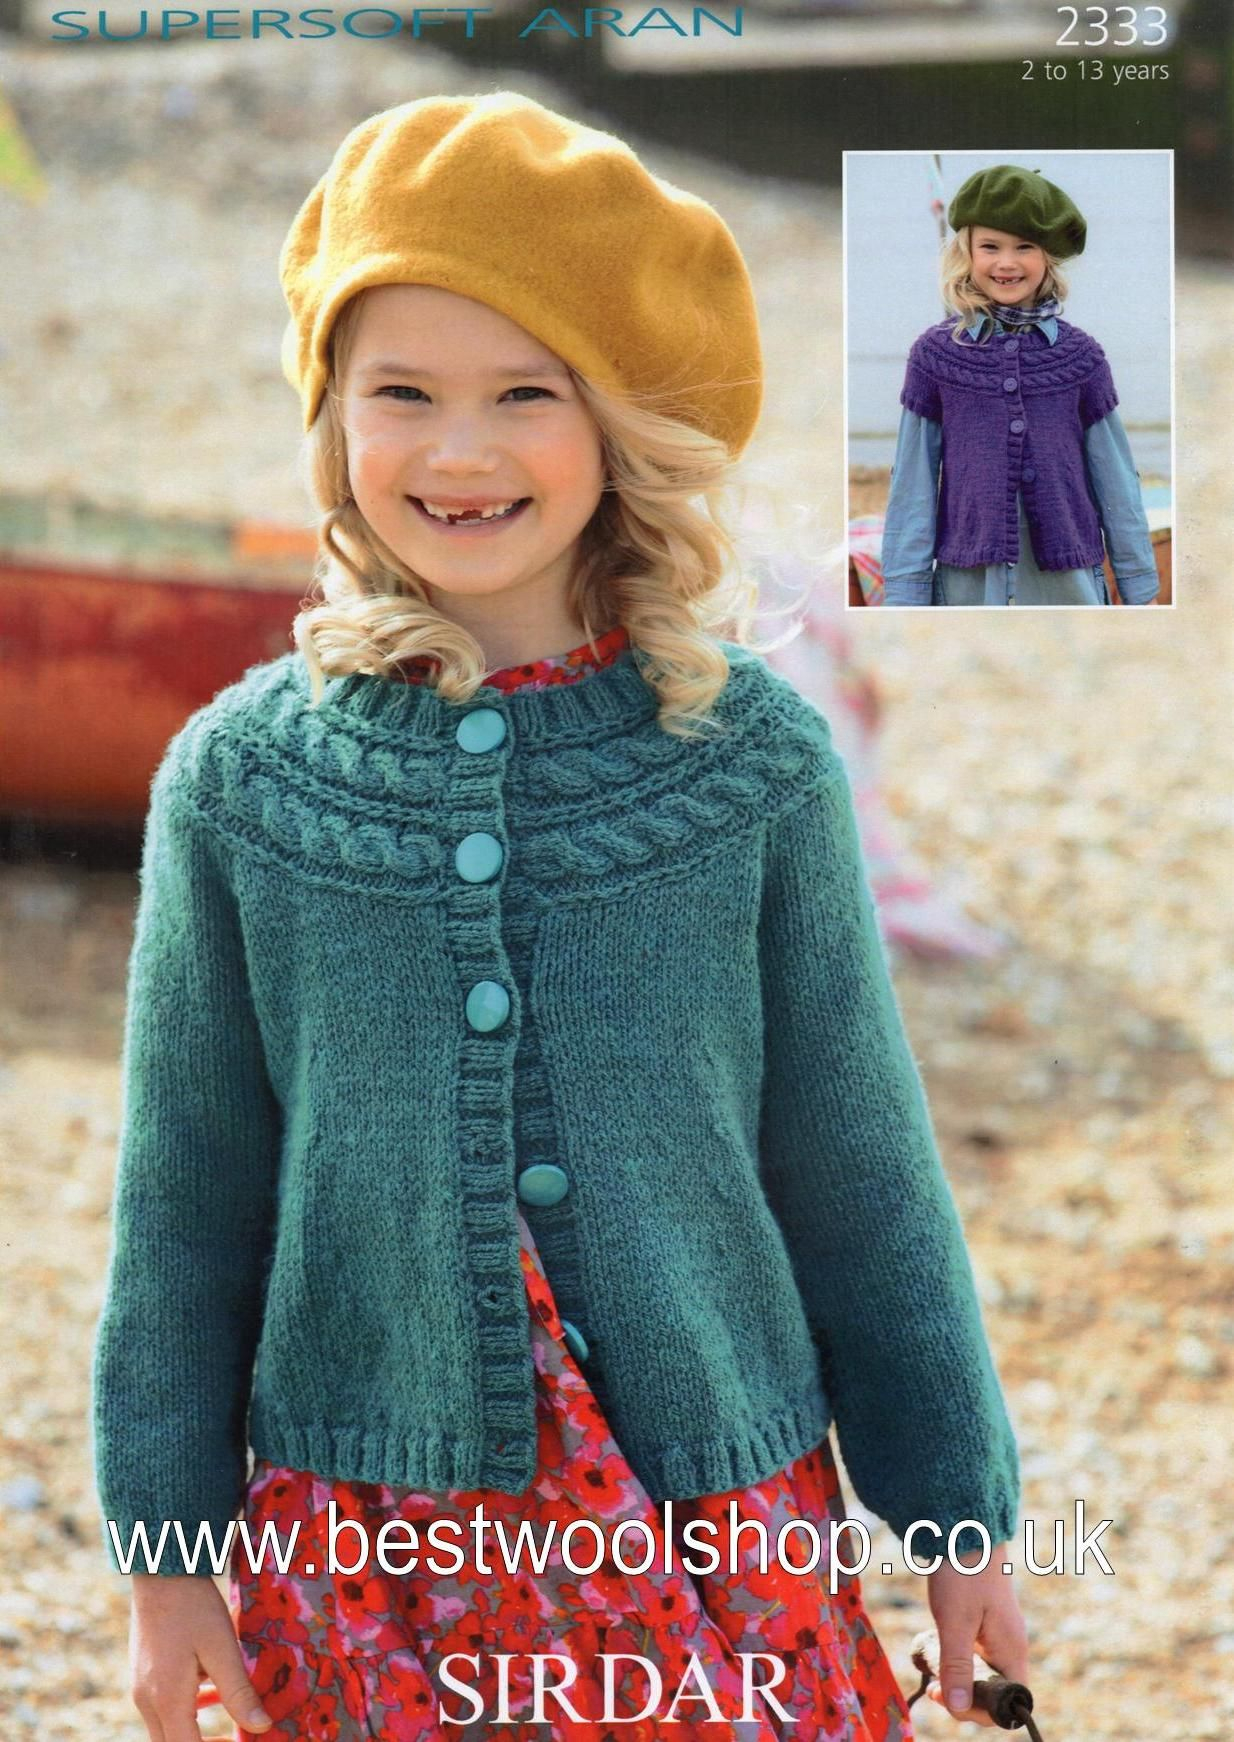 Childrens Aran Knitting Patterns 2333 Sirdar Supersoft Aran Cabled Yolk Long Short Sleeved Cardigan Knitting Pattern To Fit 2 To 13 Years